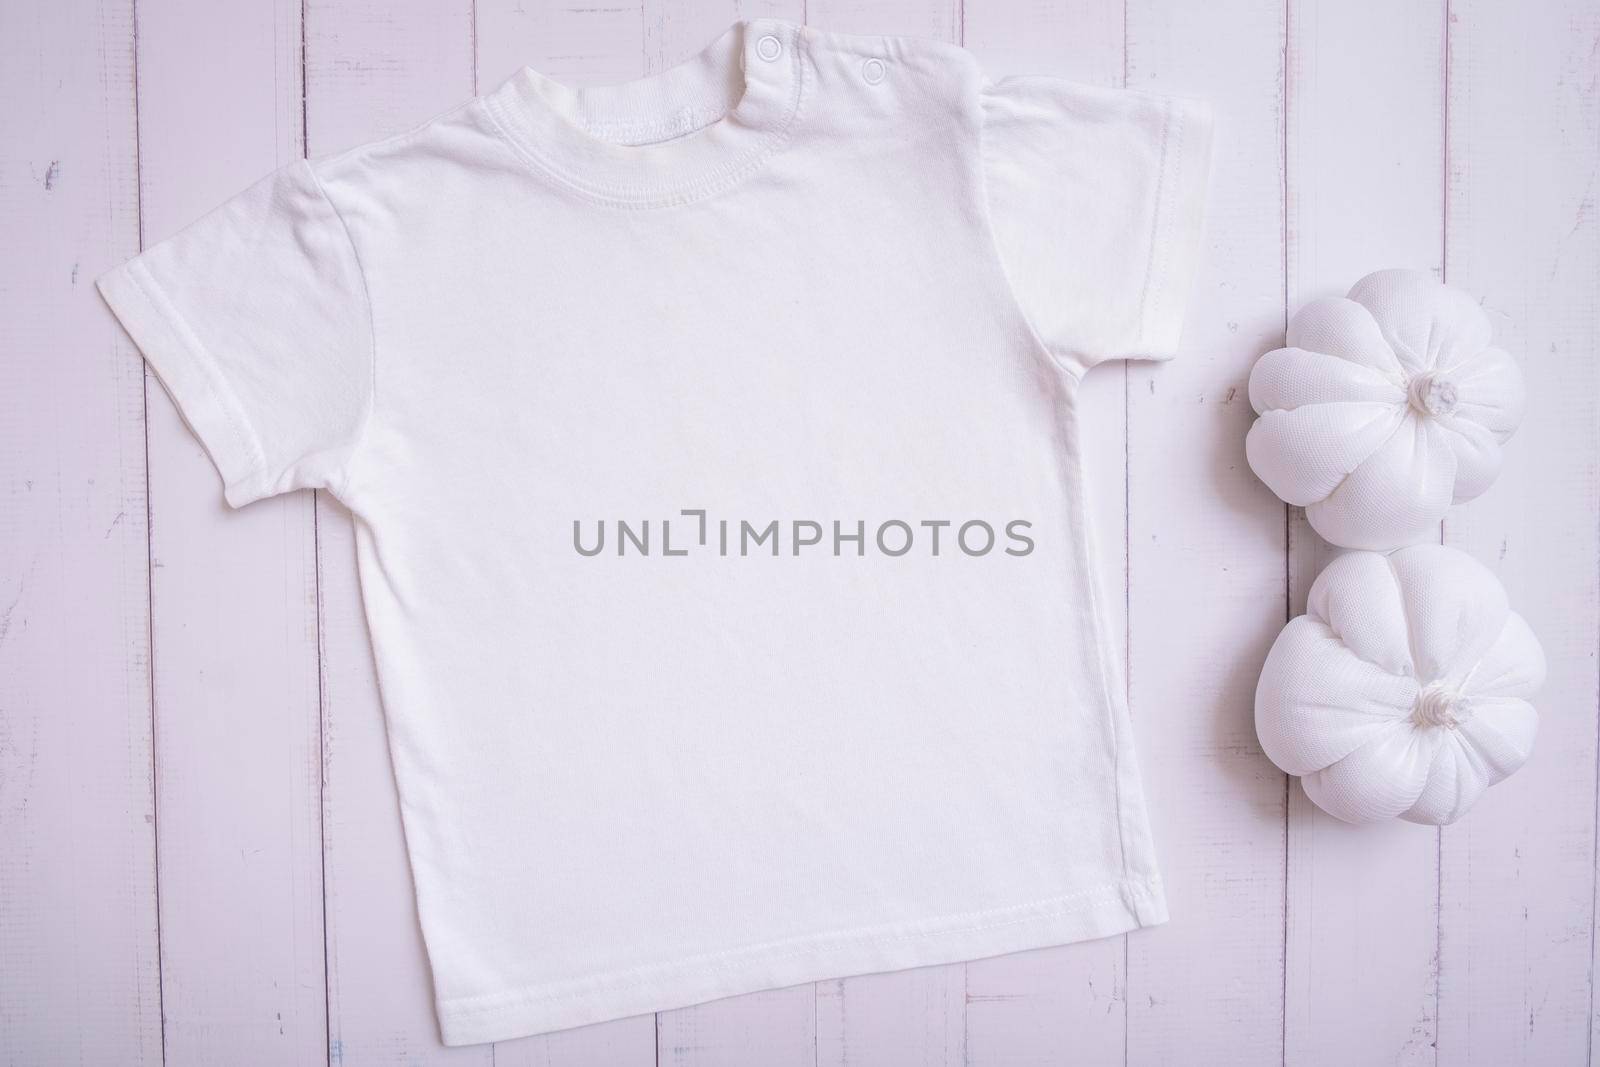 White children's t-shirt mockup for logo, text or design on wooden background with pumpkins top view.